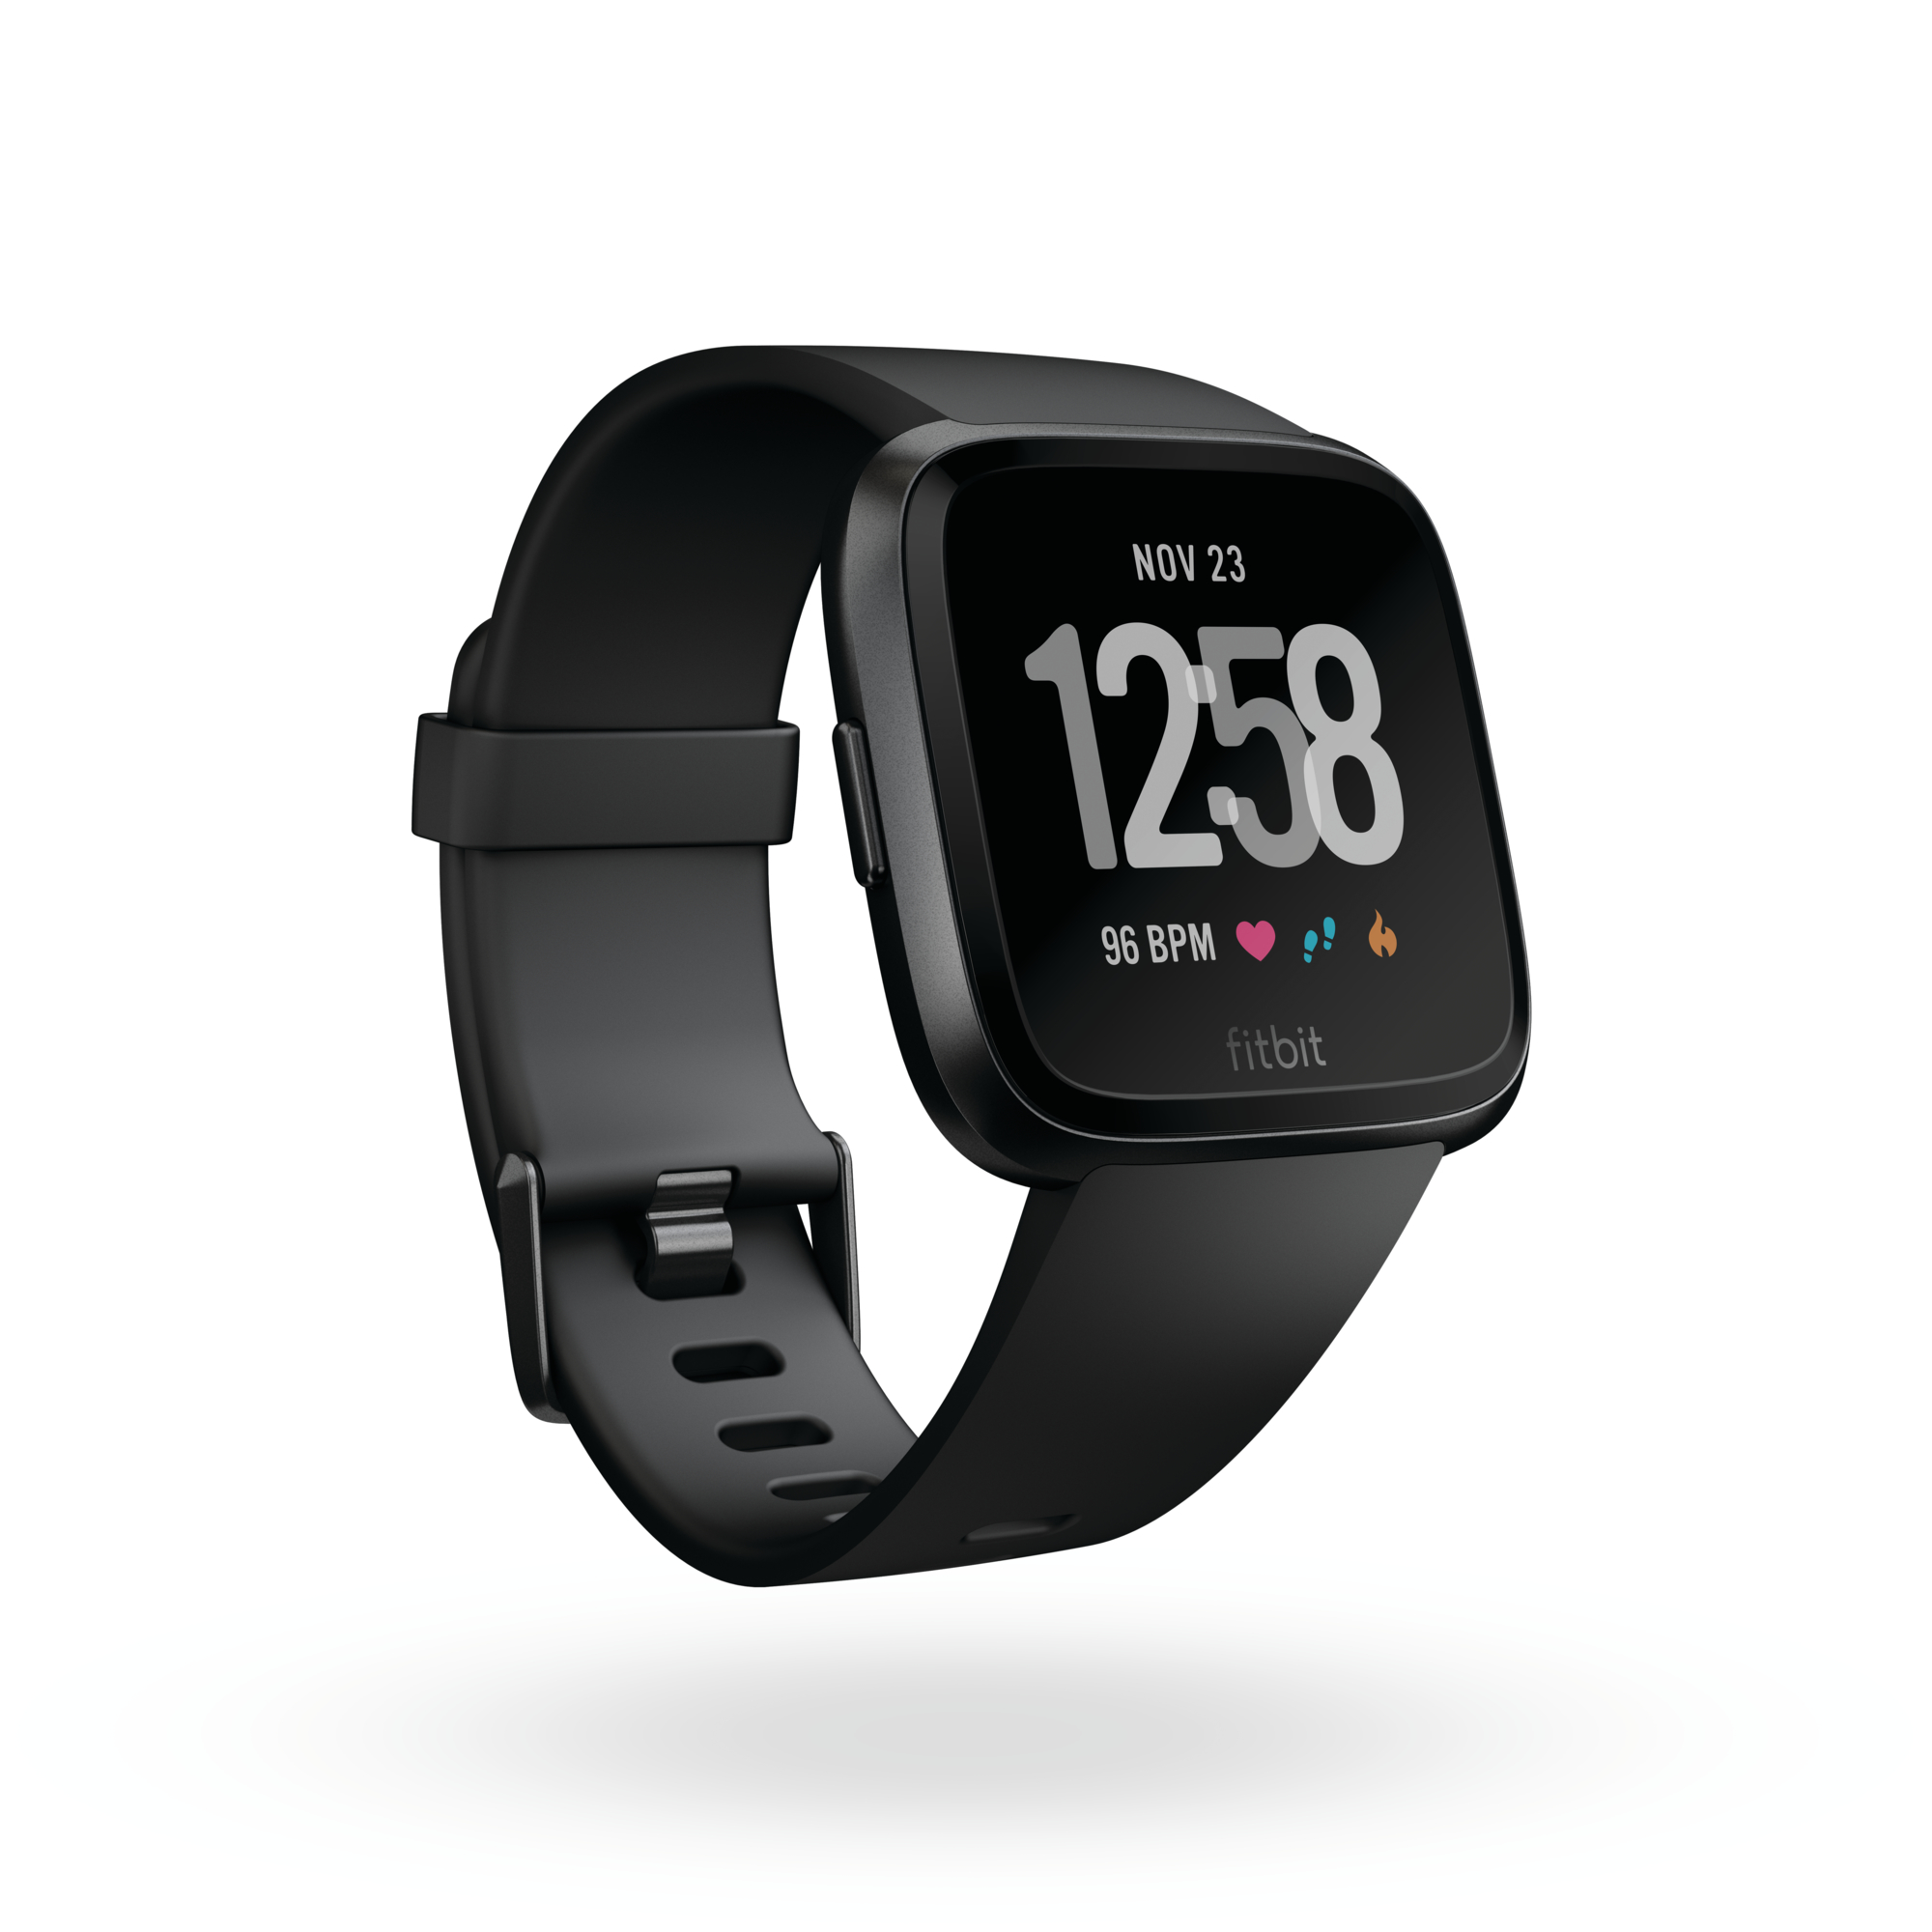 Father's Day gift guide: Fitbit Versa